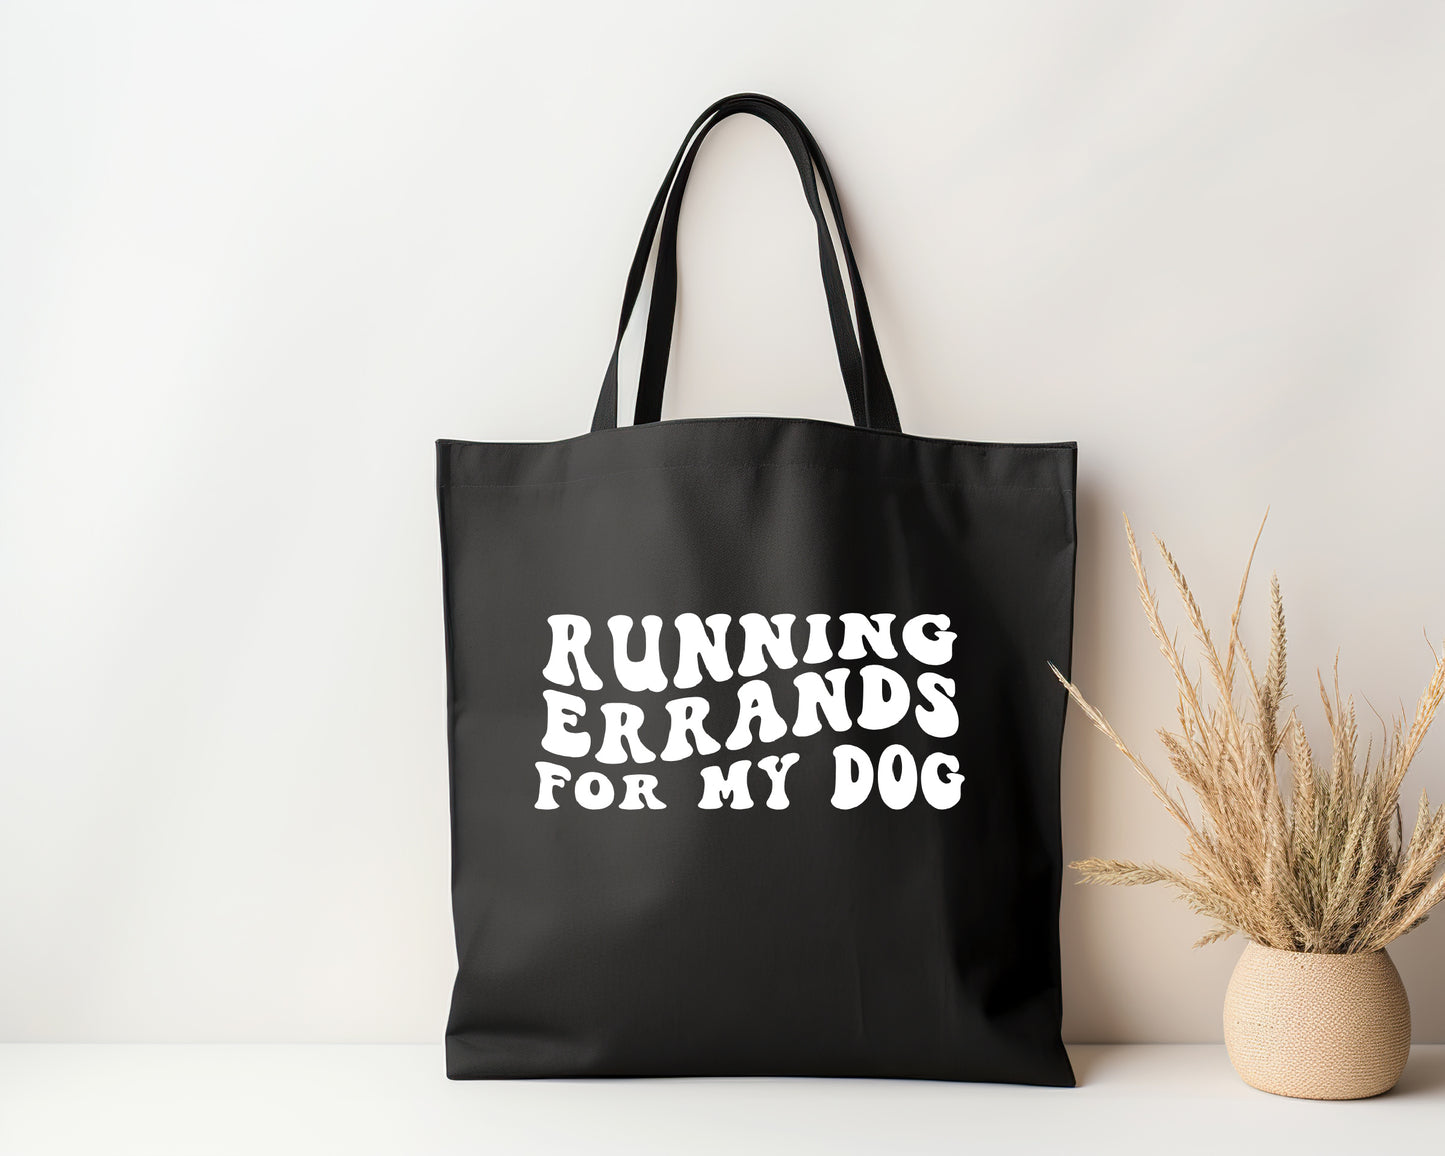 Running Errands for My Dog Tote